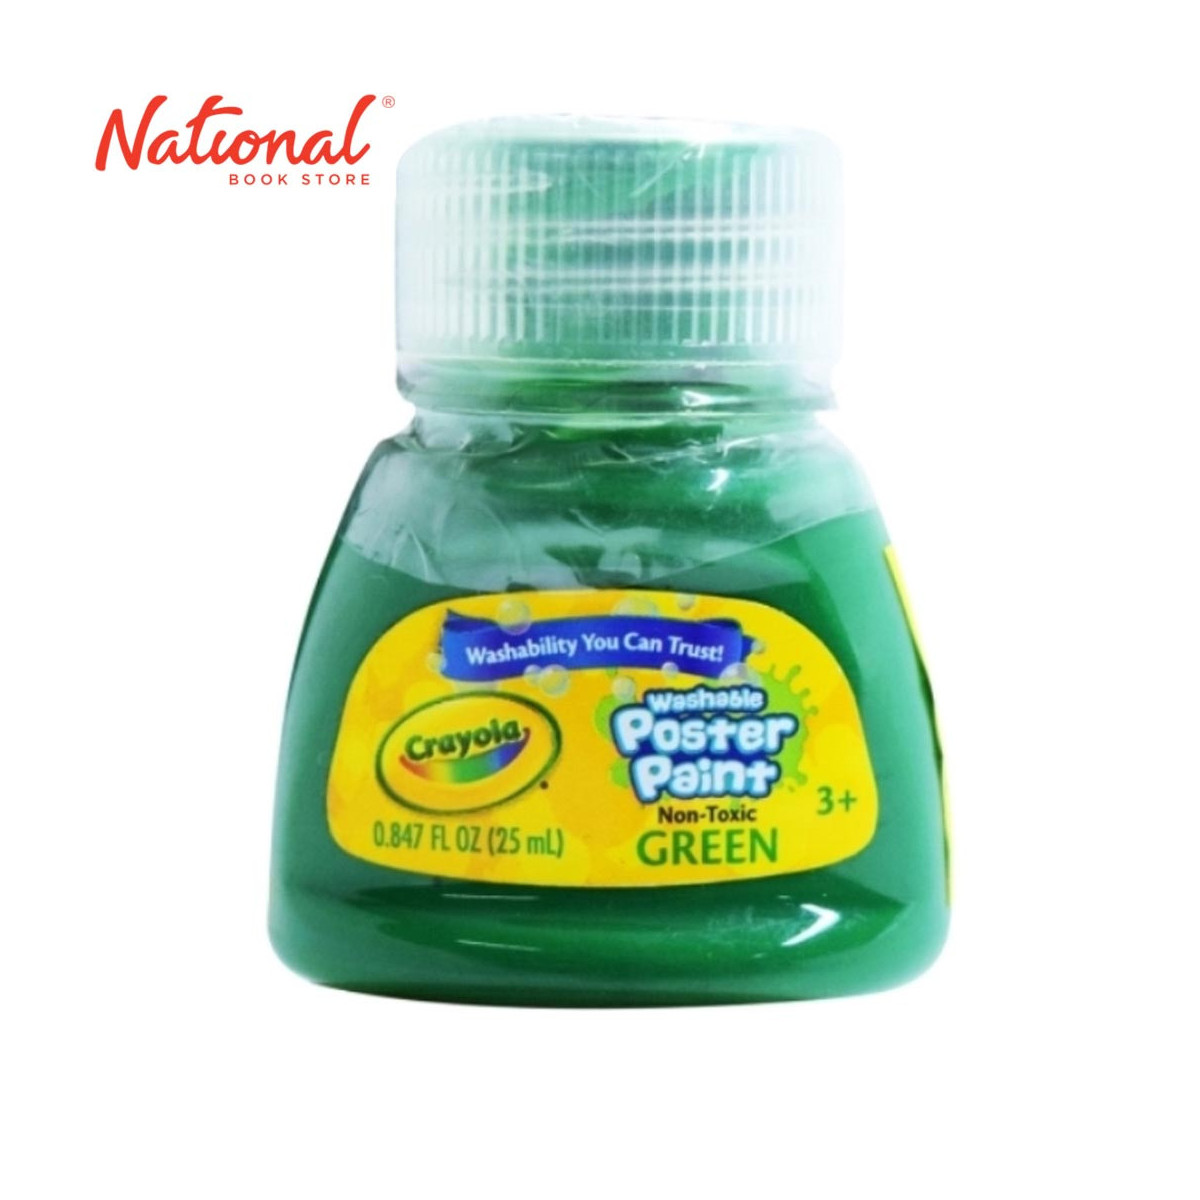 CRAYOLA WASHABLE POSTER PAINT 54-2001-0-144 GREEN